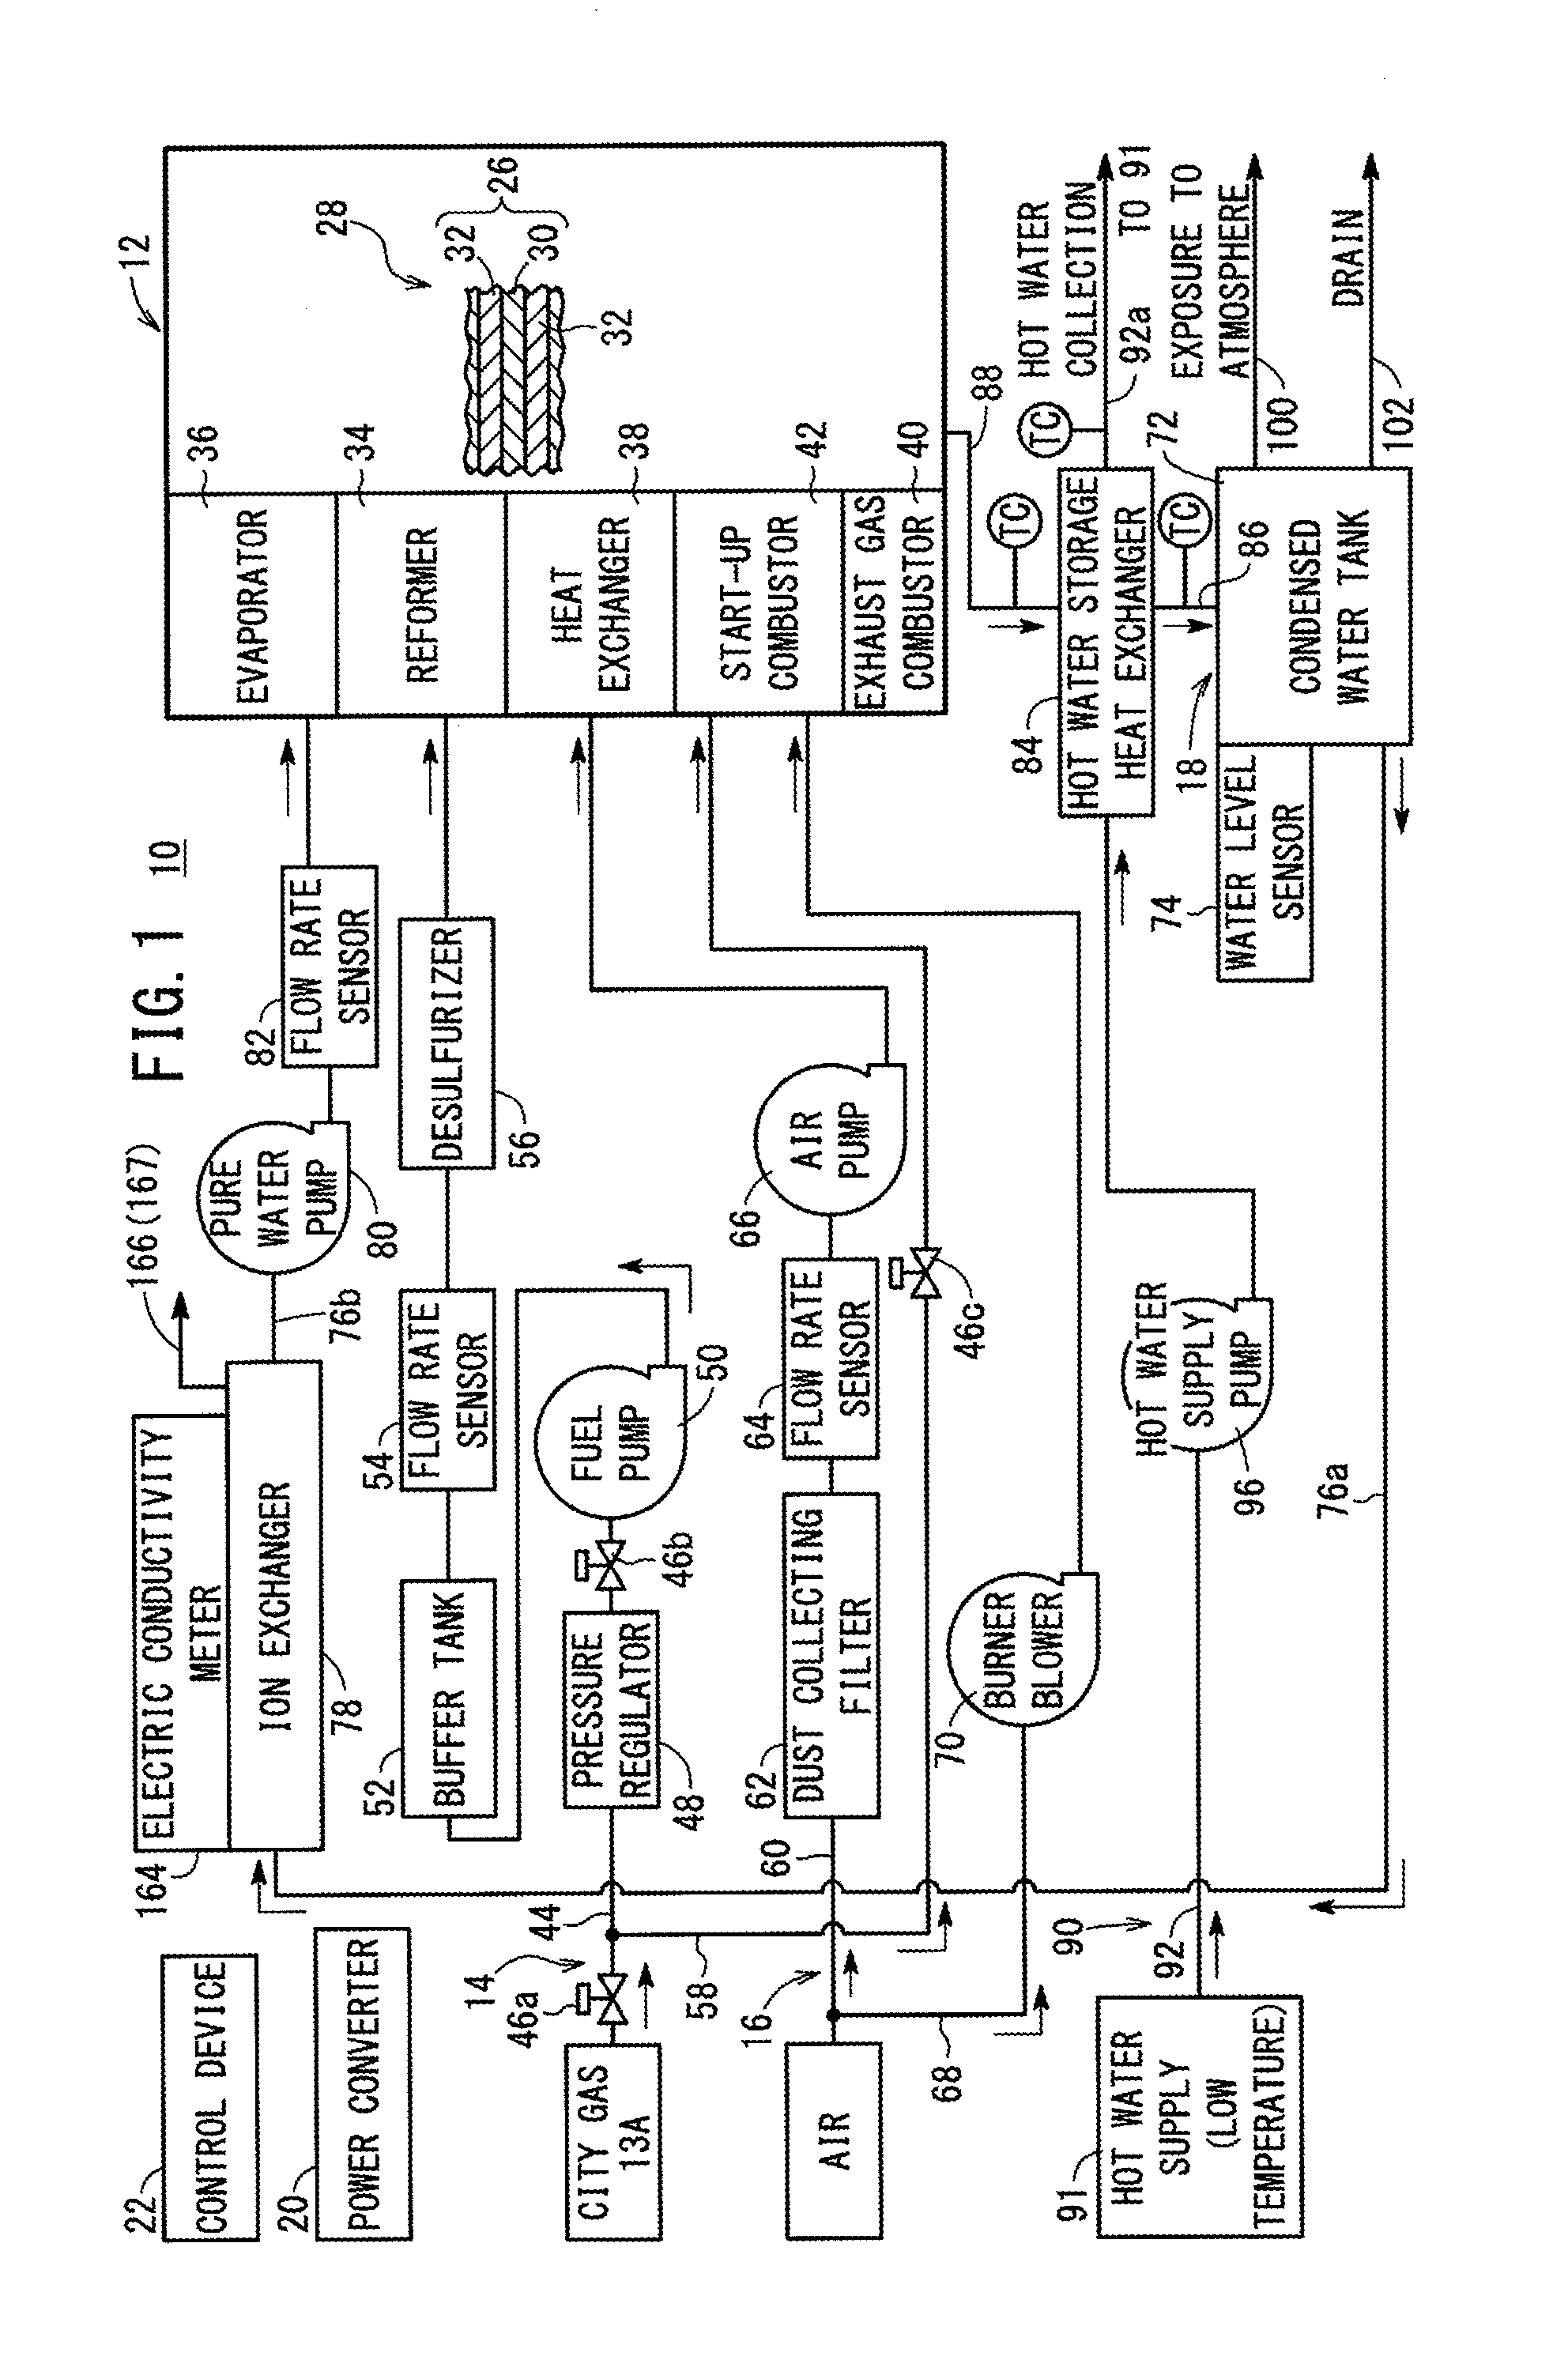 Fuel cell system ion exchanger